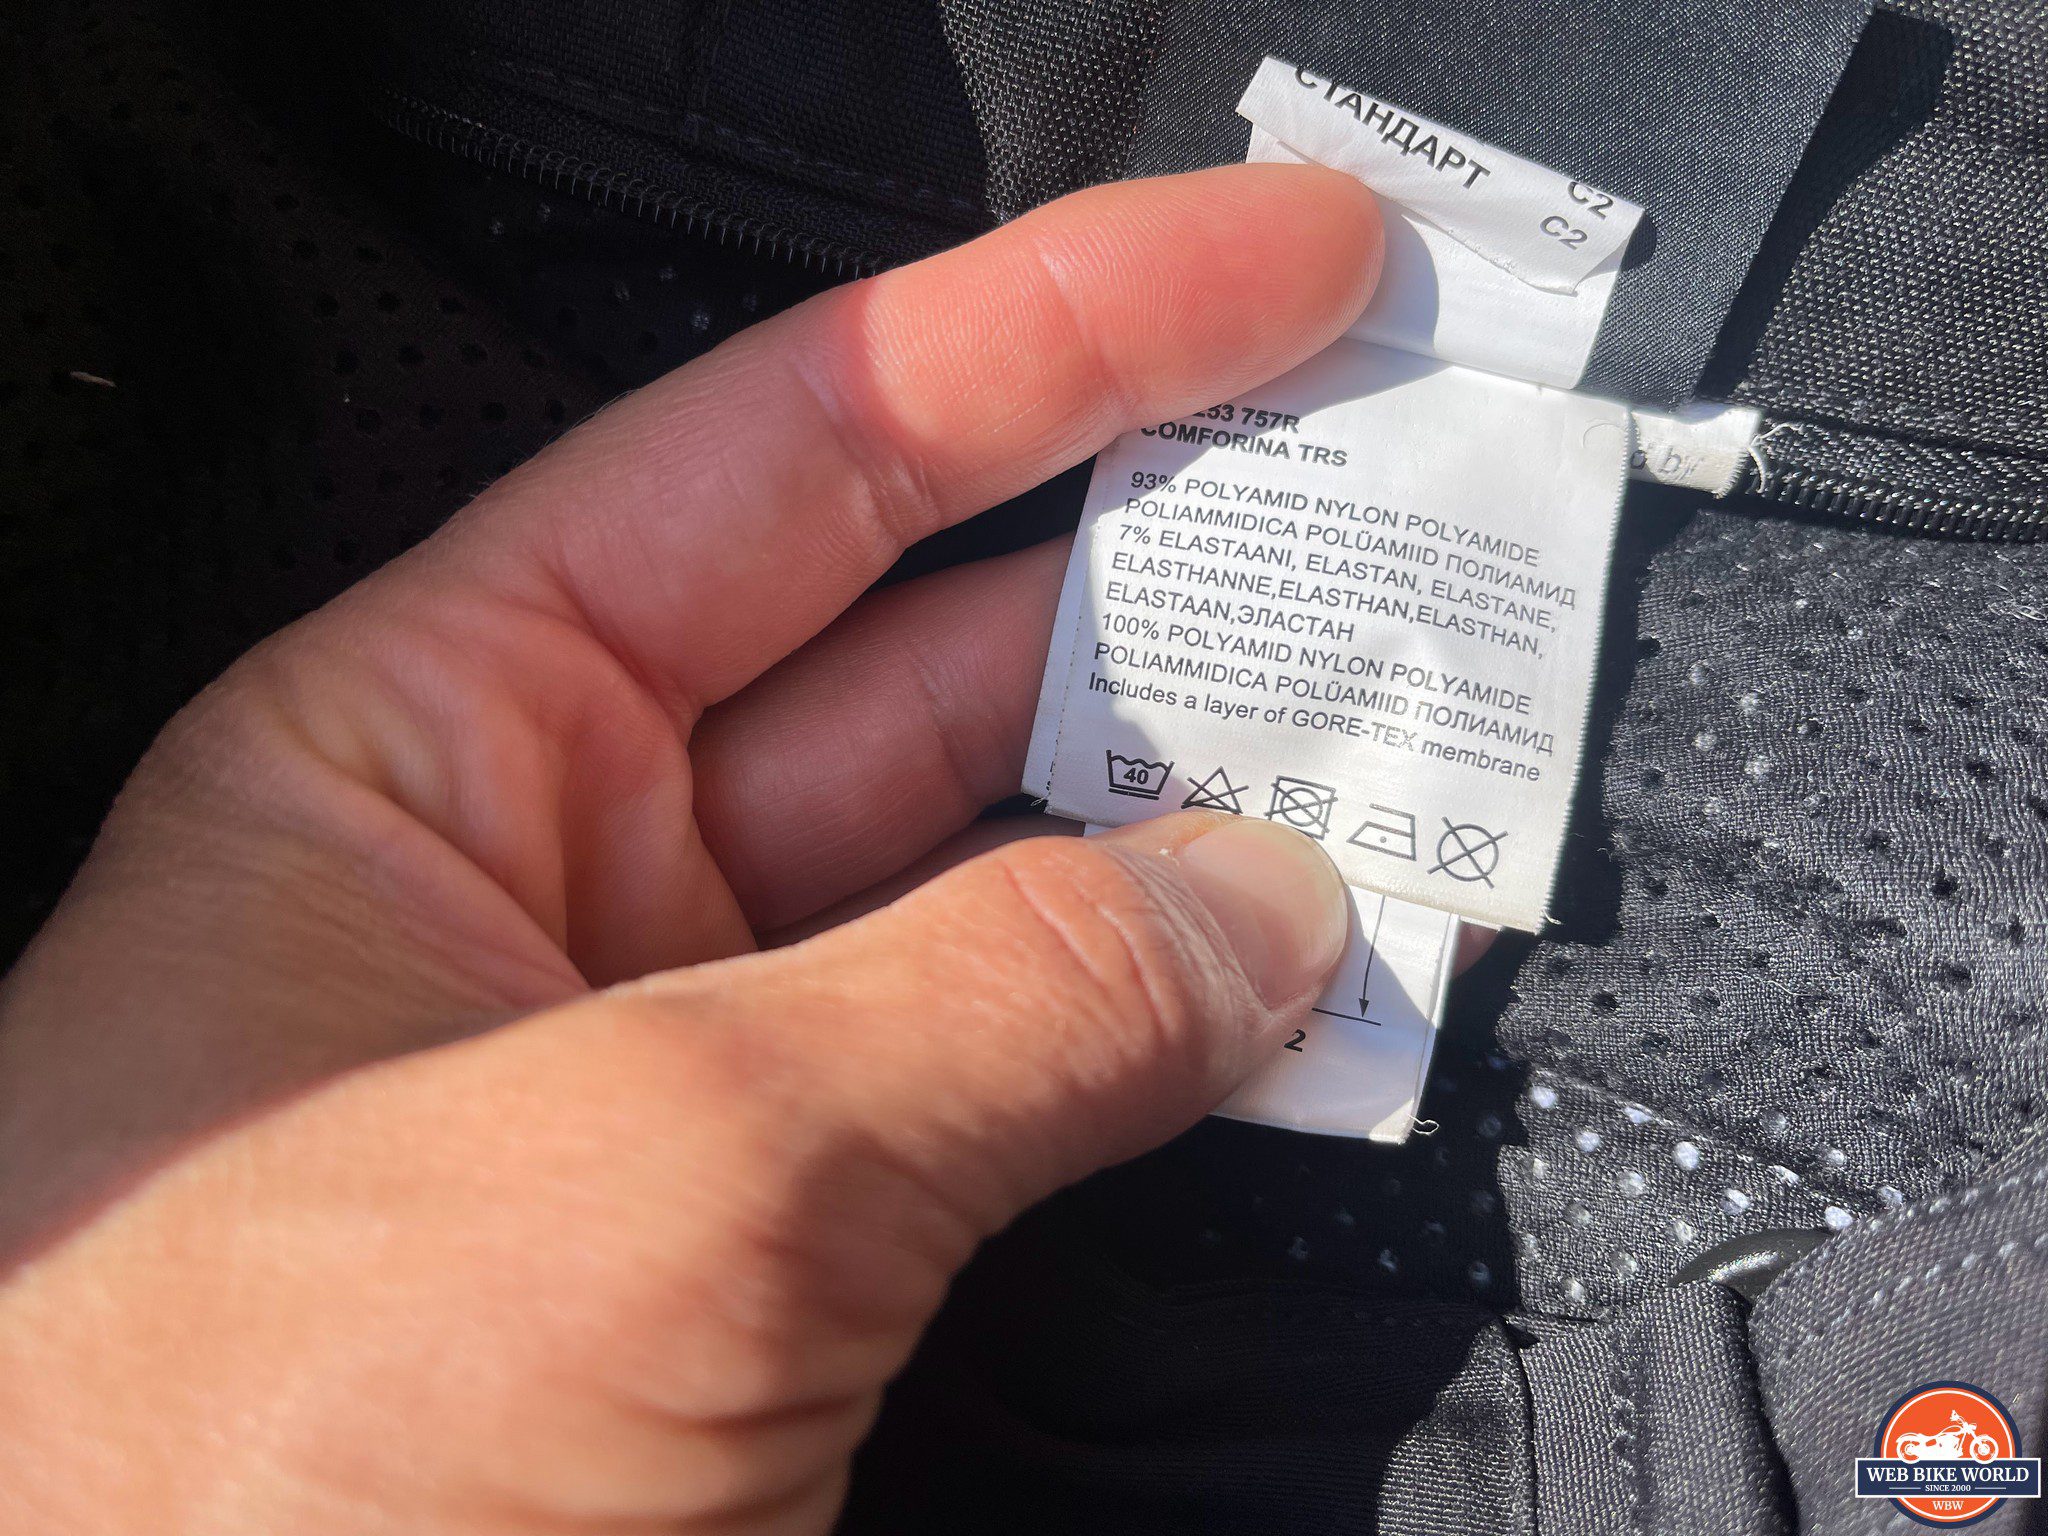 Materials tag on the pants